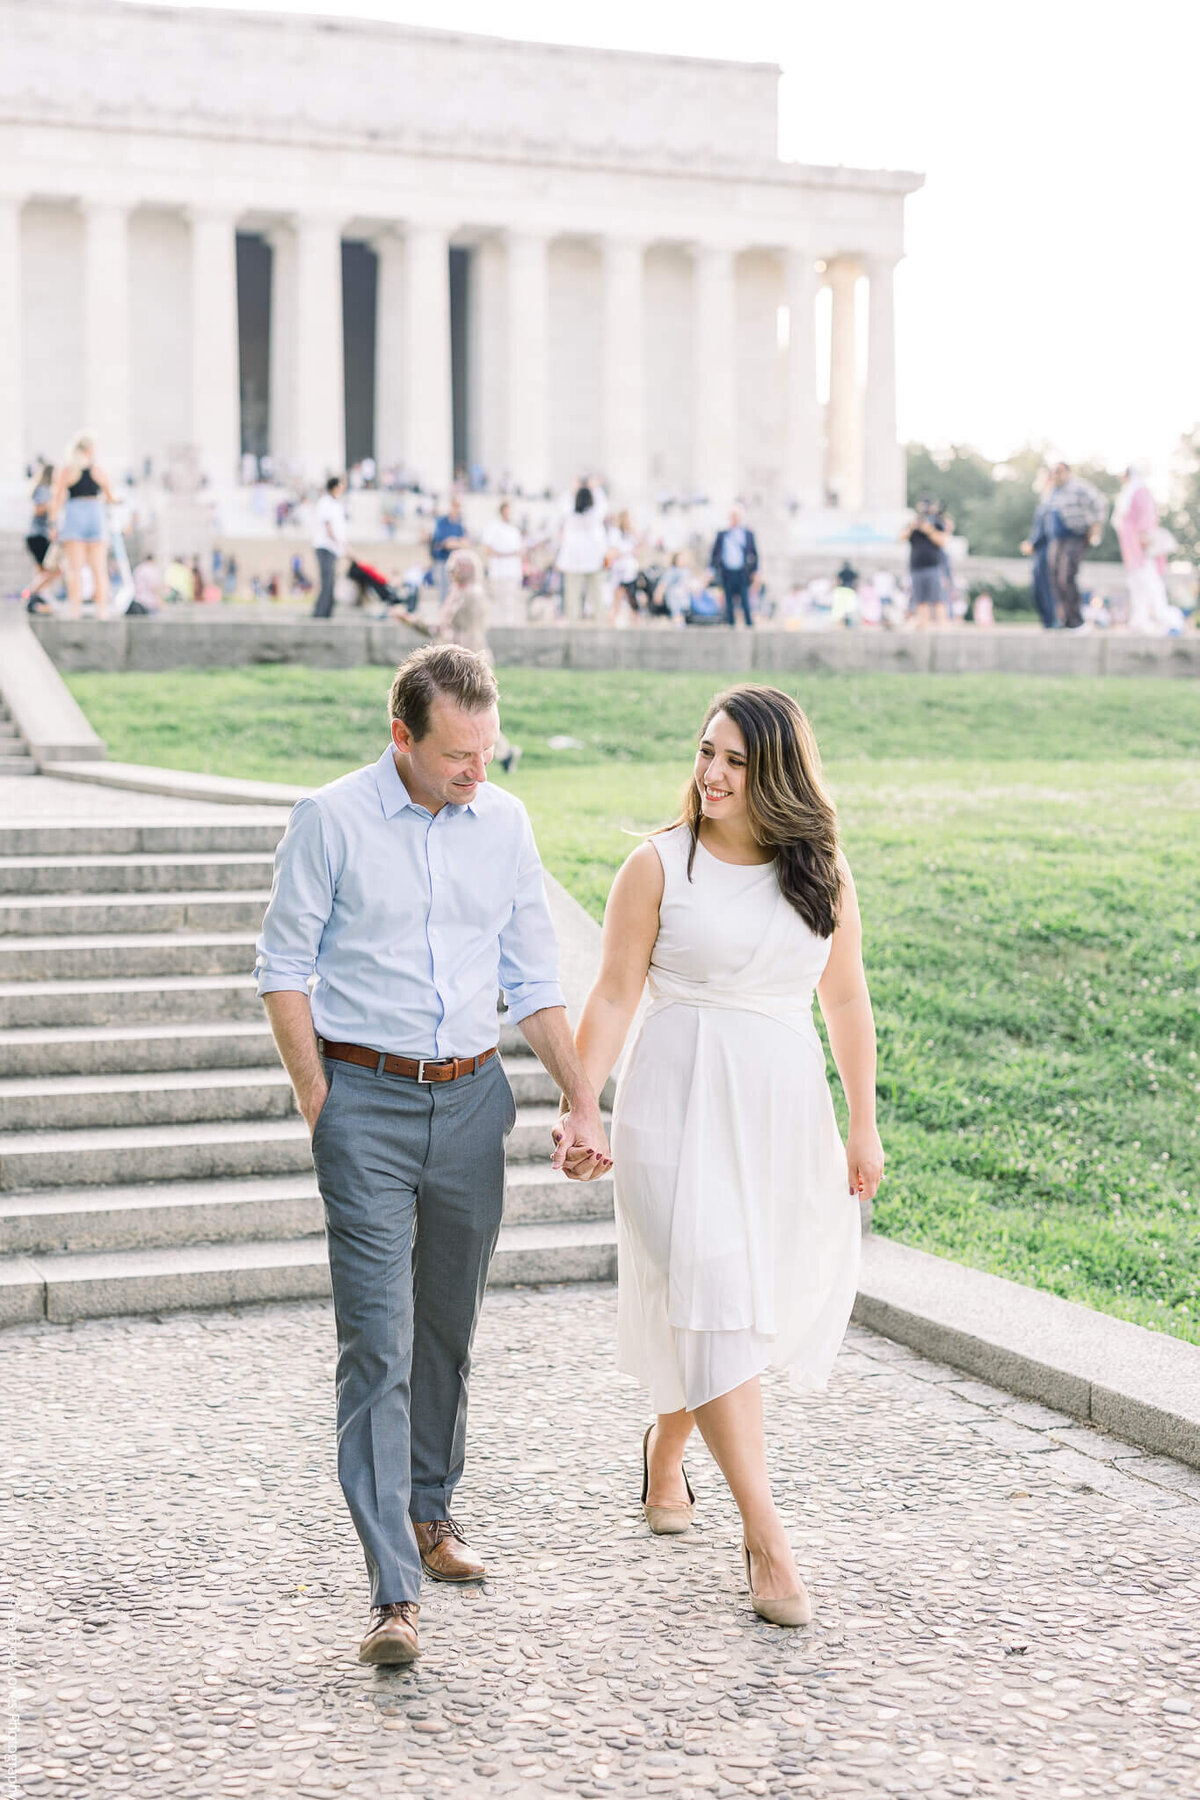 surprise-proposal-lincoln-monument-national-mall-photography-washington-DC-modern-light-and-airy-classic-timeless-romantic-maryland-11